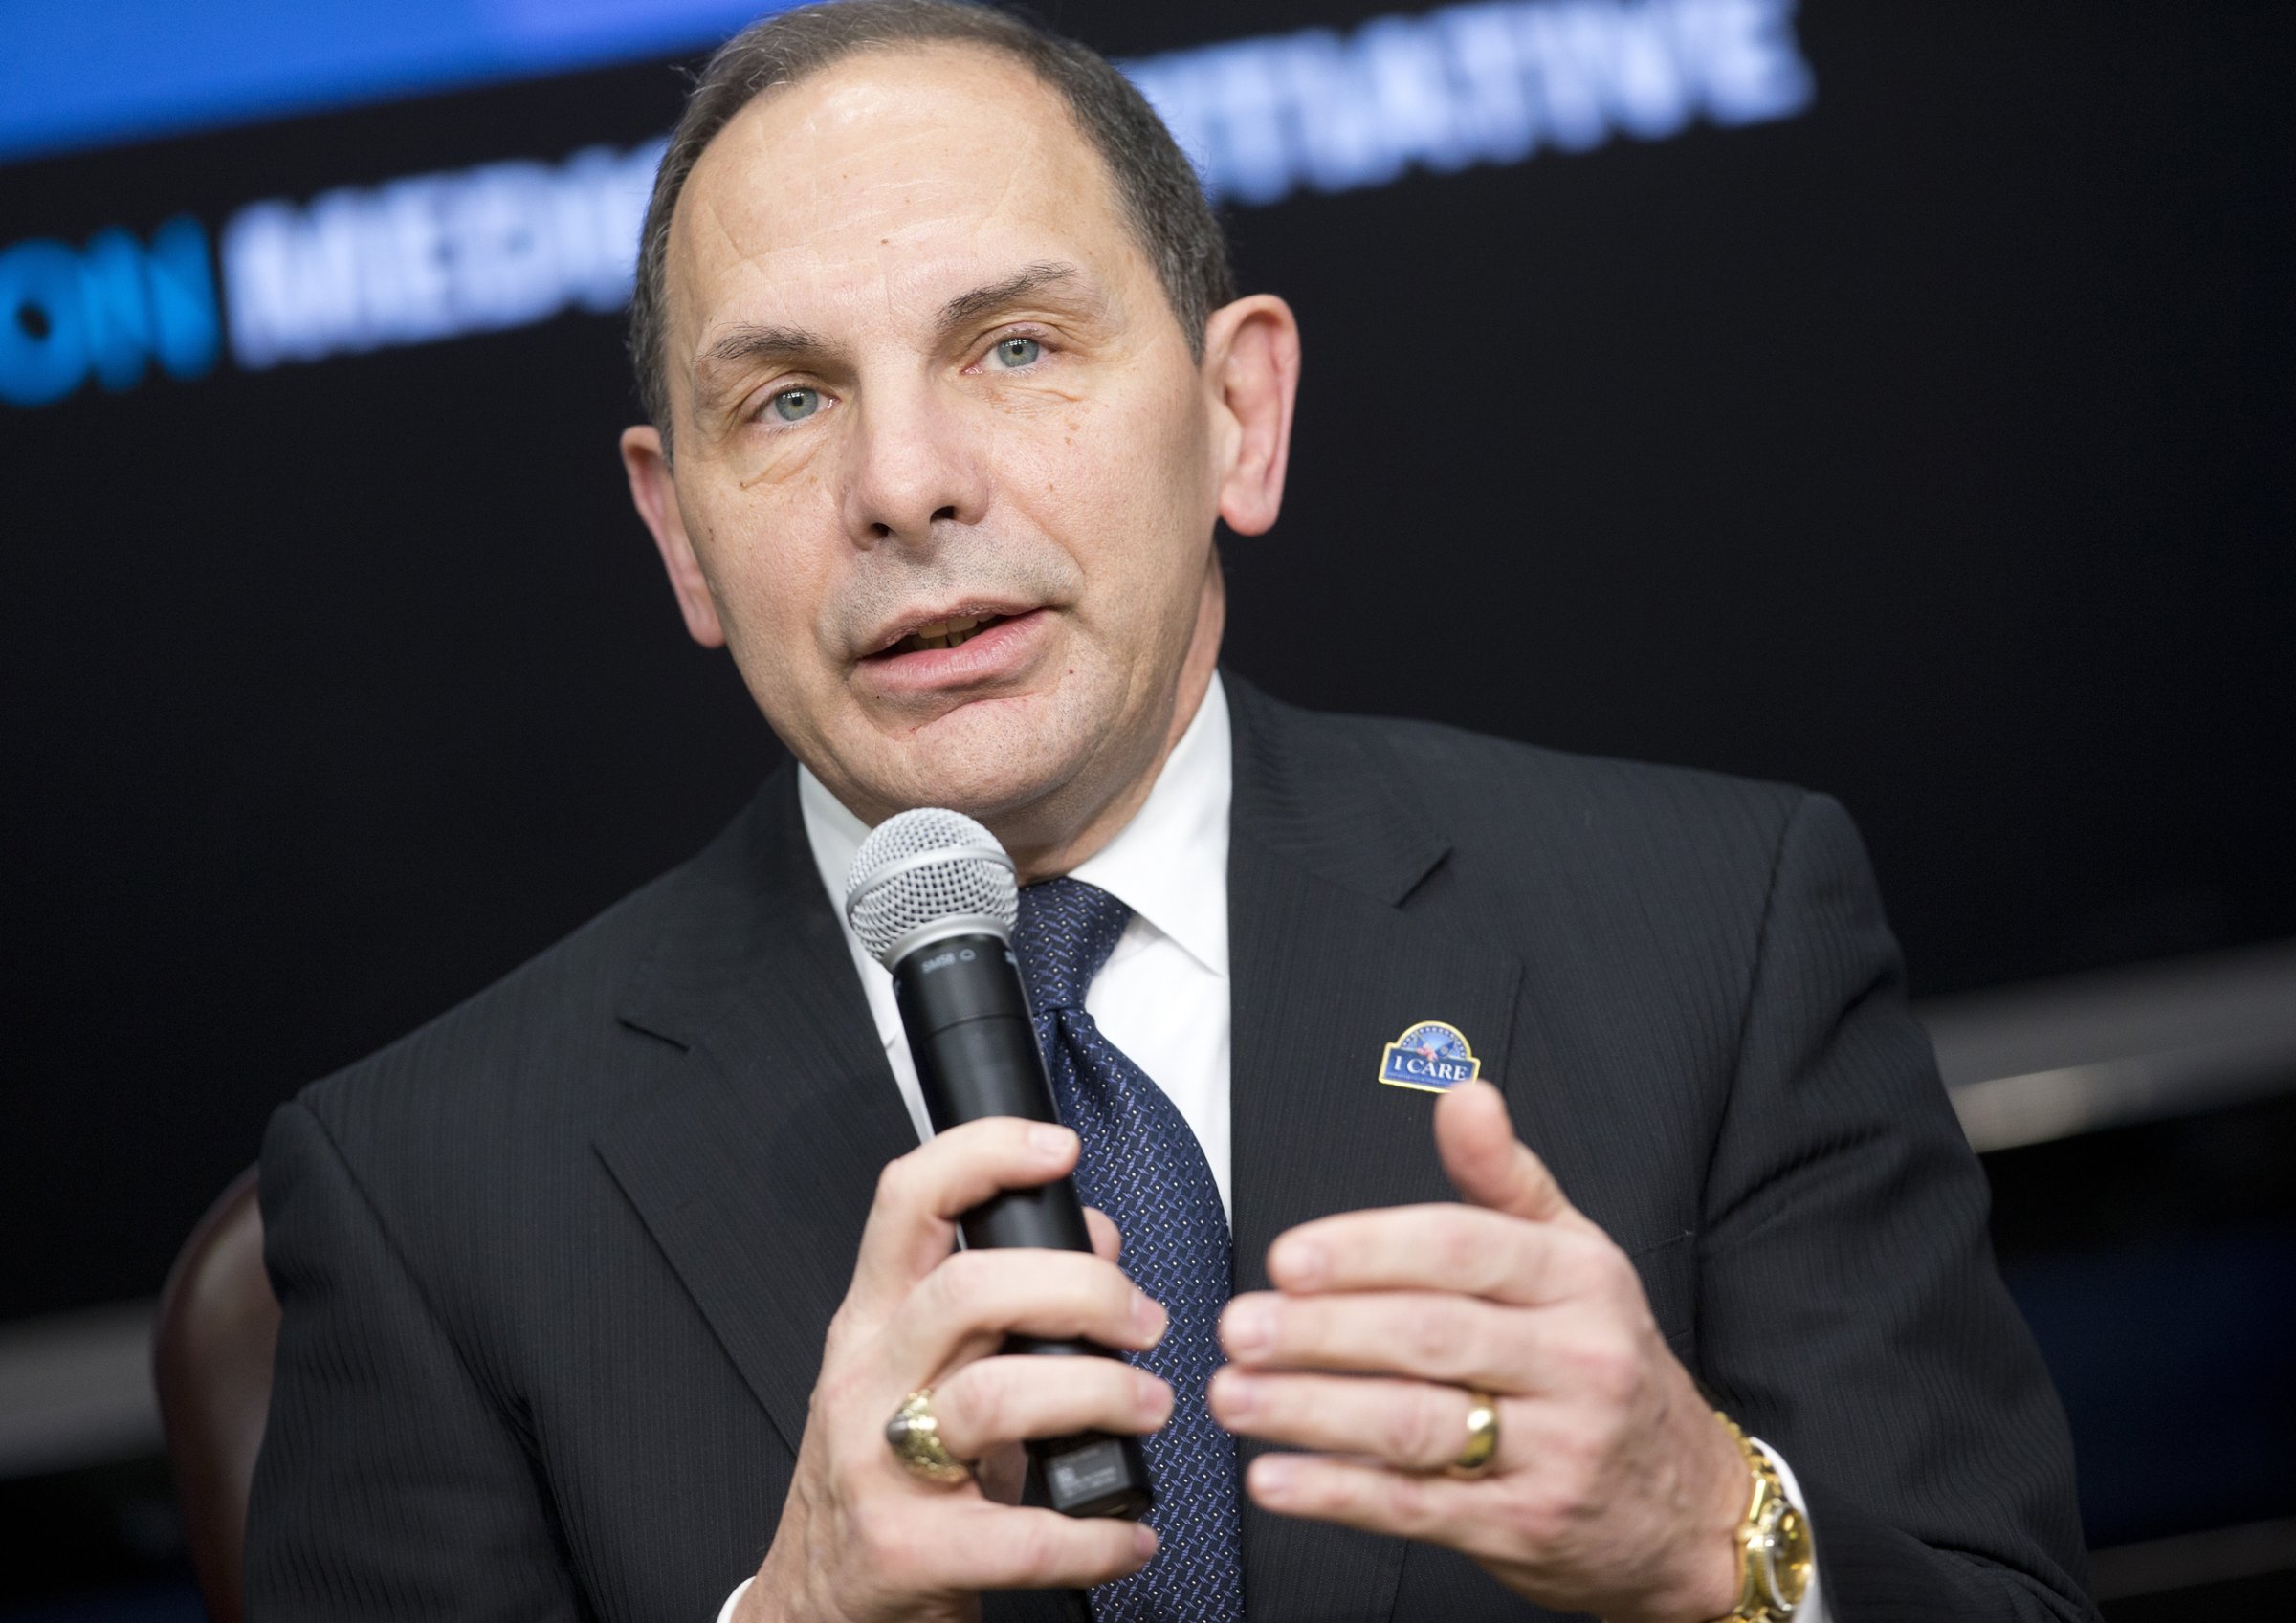 Veterans Affairs Secretary Robert McDonald during a panel discussion as part of the White House Precision Medicine Initiative (PMI) in the South Court Auditorium in the Eisenhower Executive Office Building on the White House complex in Washington, Thursday, Feb. 25, 2016. (AP Photo/Pablo Martinez Monsivais)